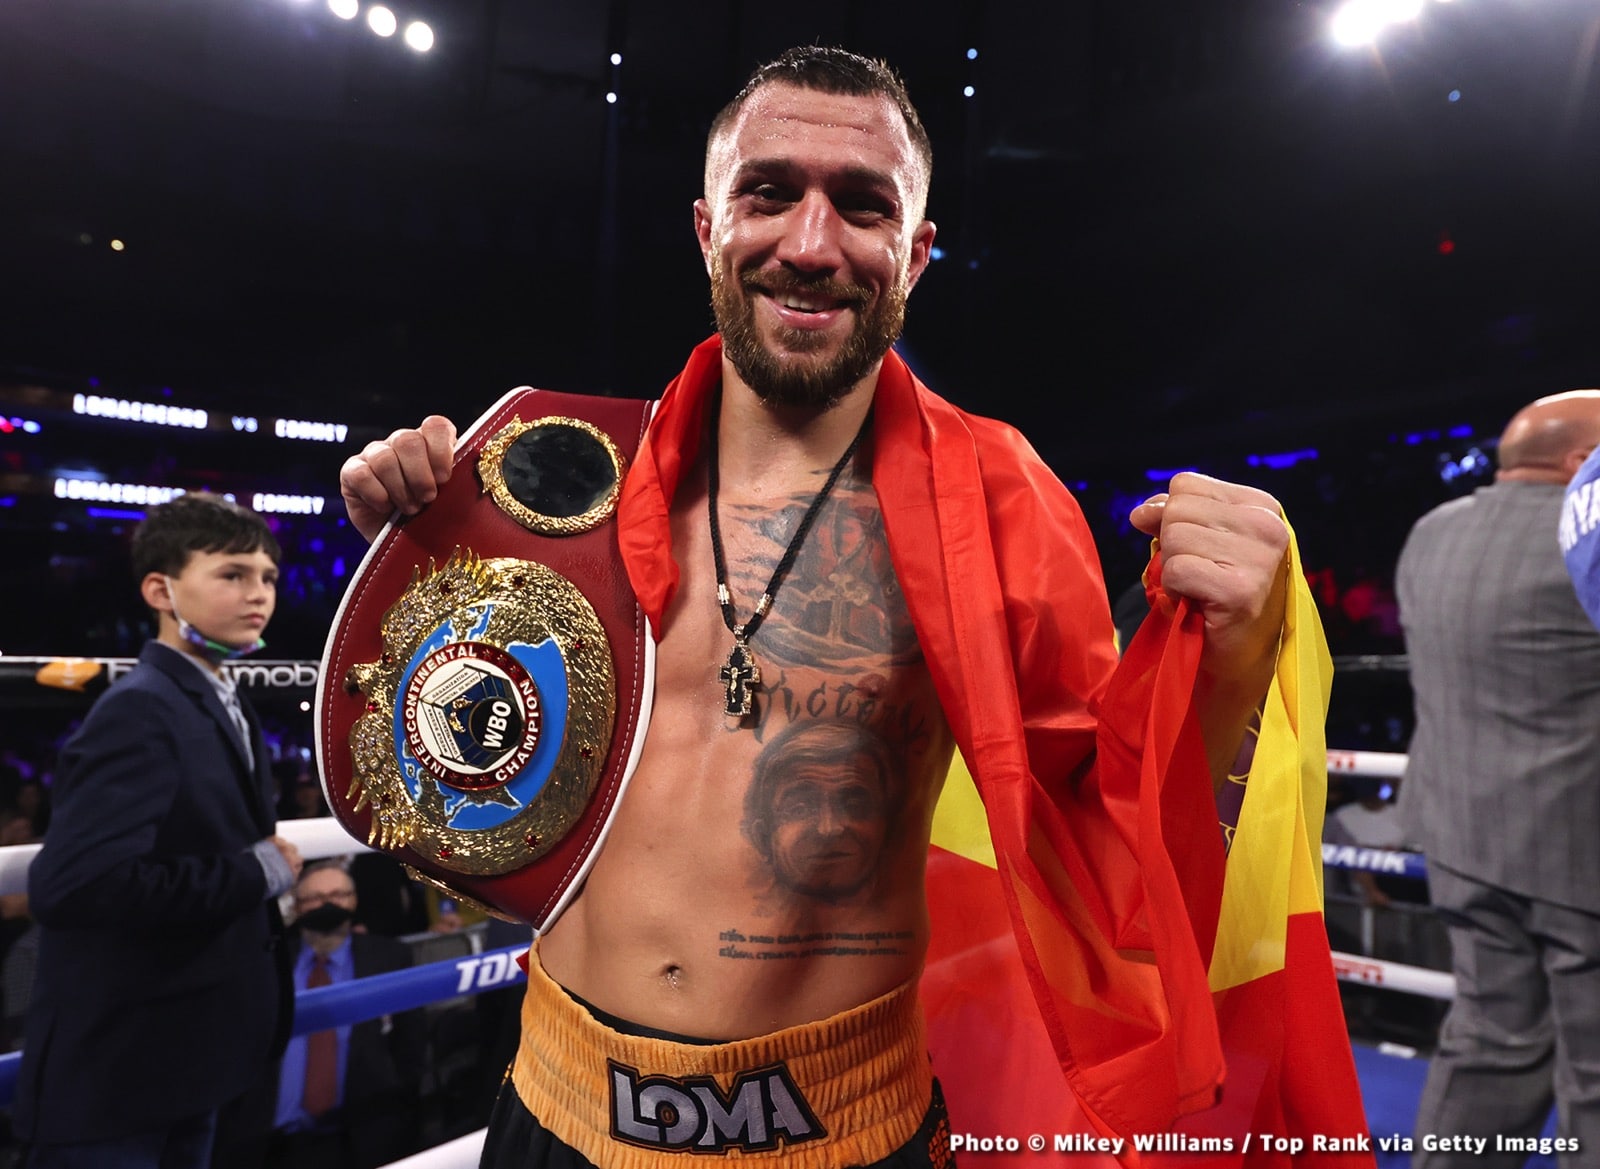 Image: Boxing Results: Vasyl “Loma” Lomachenko and Richard “RC” Commey